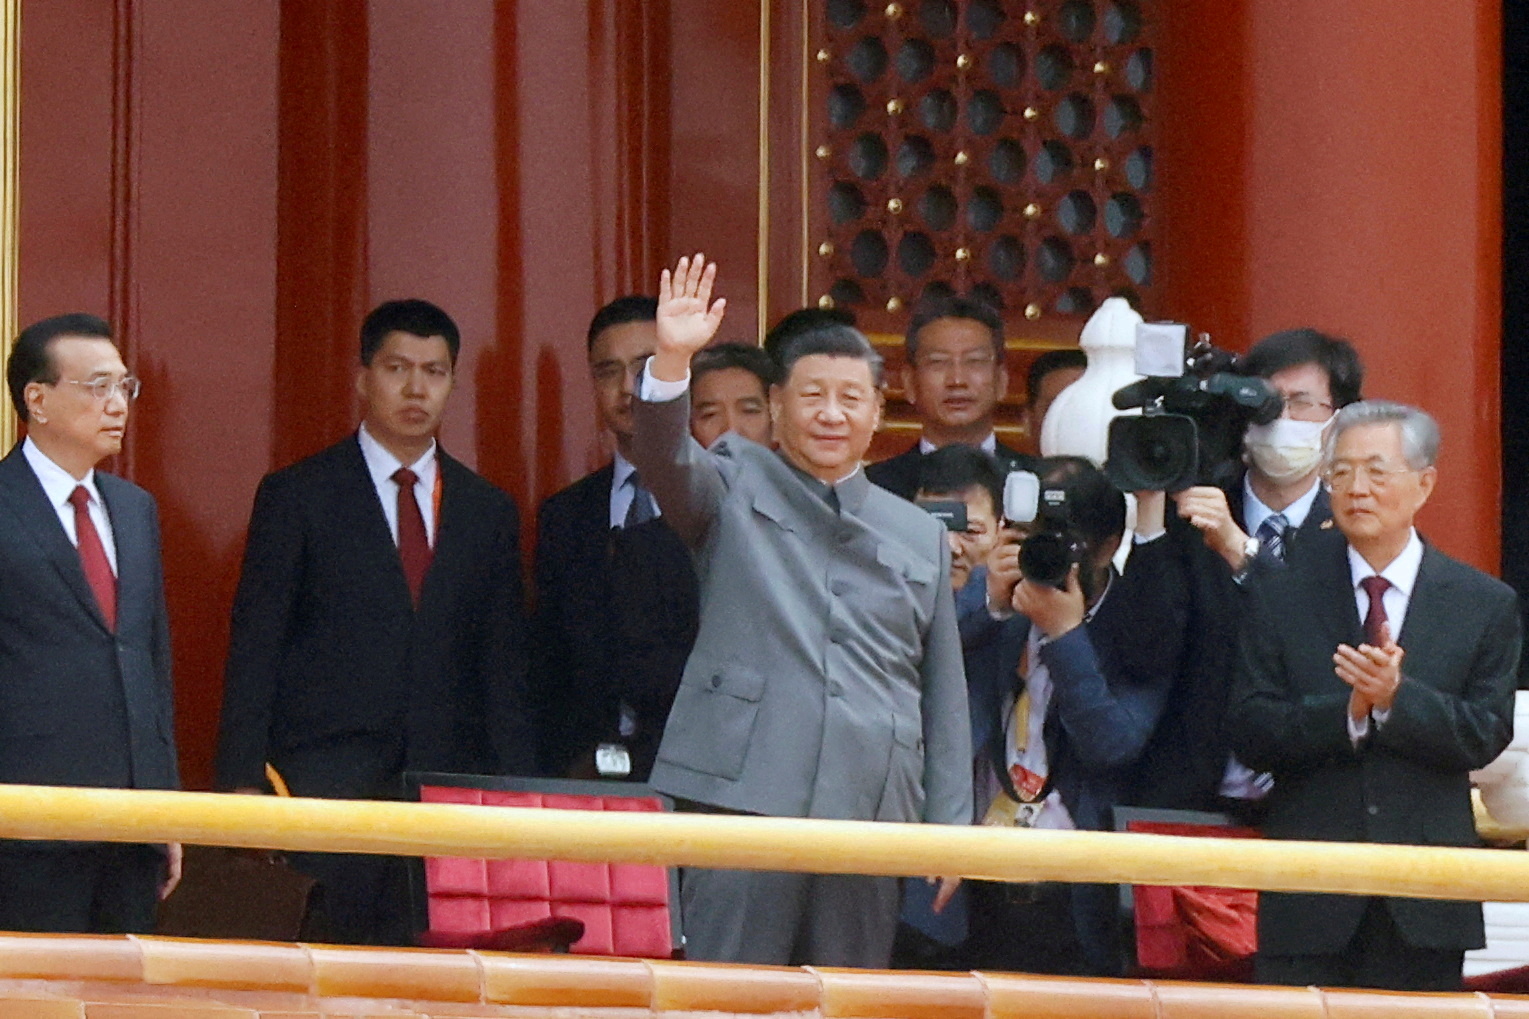 Chinese President Xi Jinping waves next to Premier Li Keqiang and former president Hu Jintao at the end of the event marking the 100th founding anniversary of the Communist Party of China, on Tiananmen Square in Beijing, China July 1, 2021. REUTERS/Carlos Garcia Rawlins/File Photo